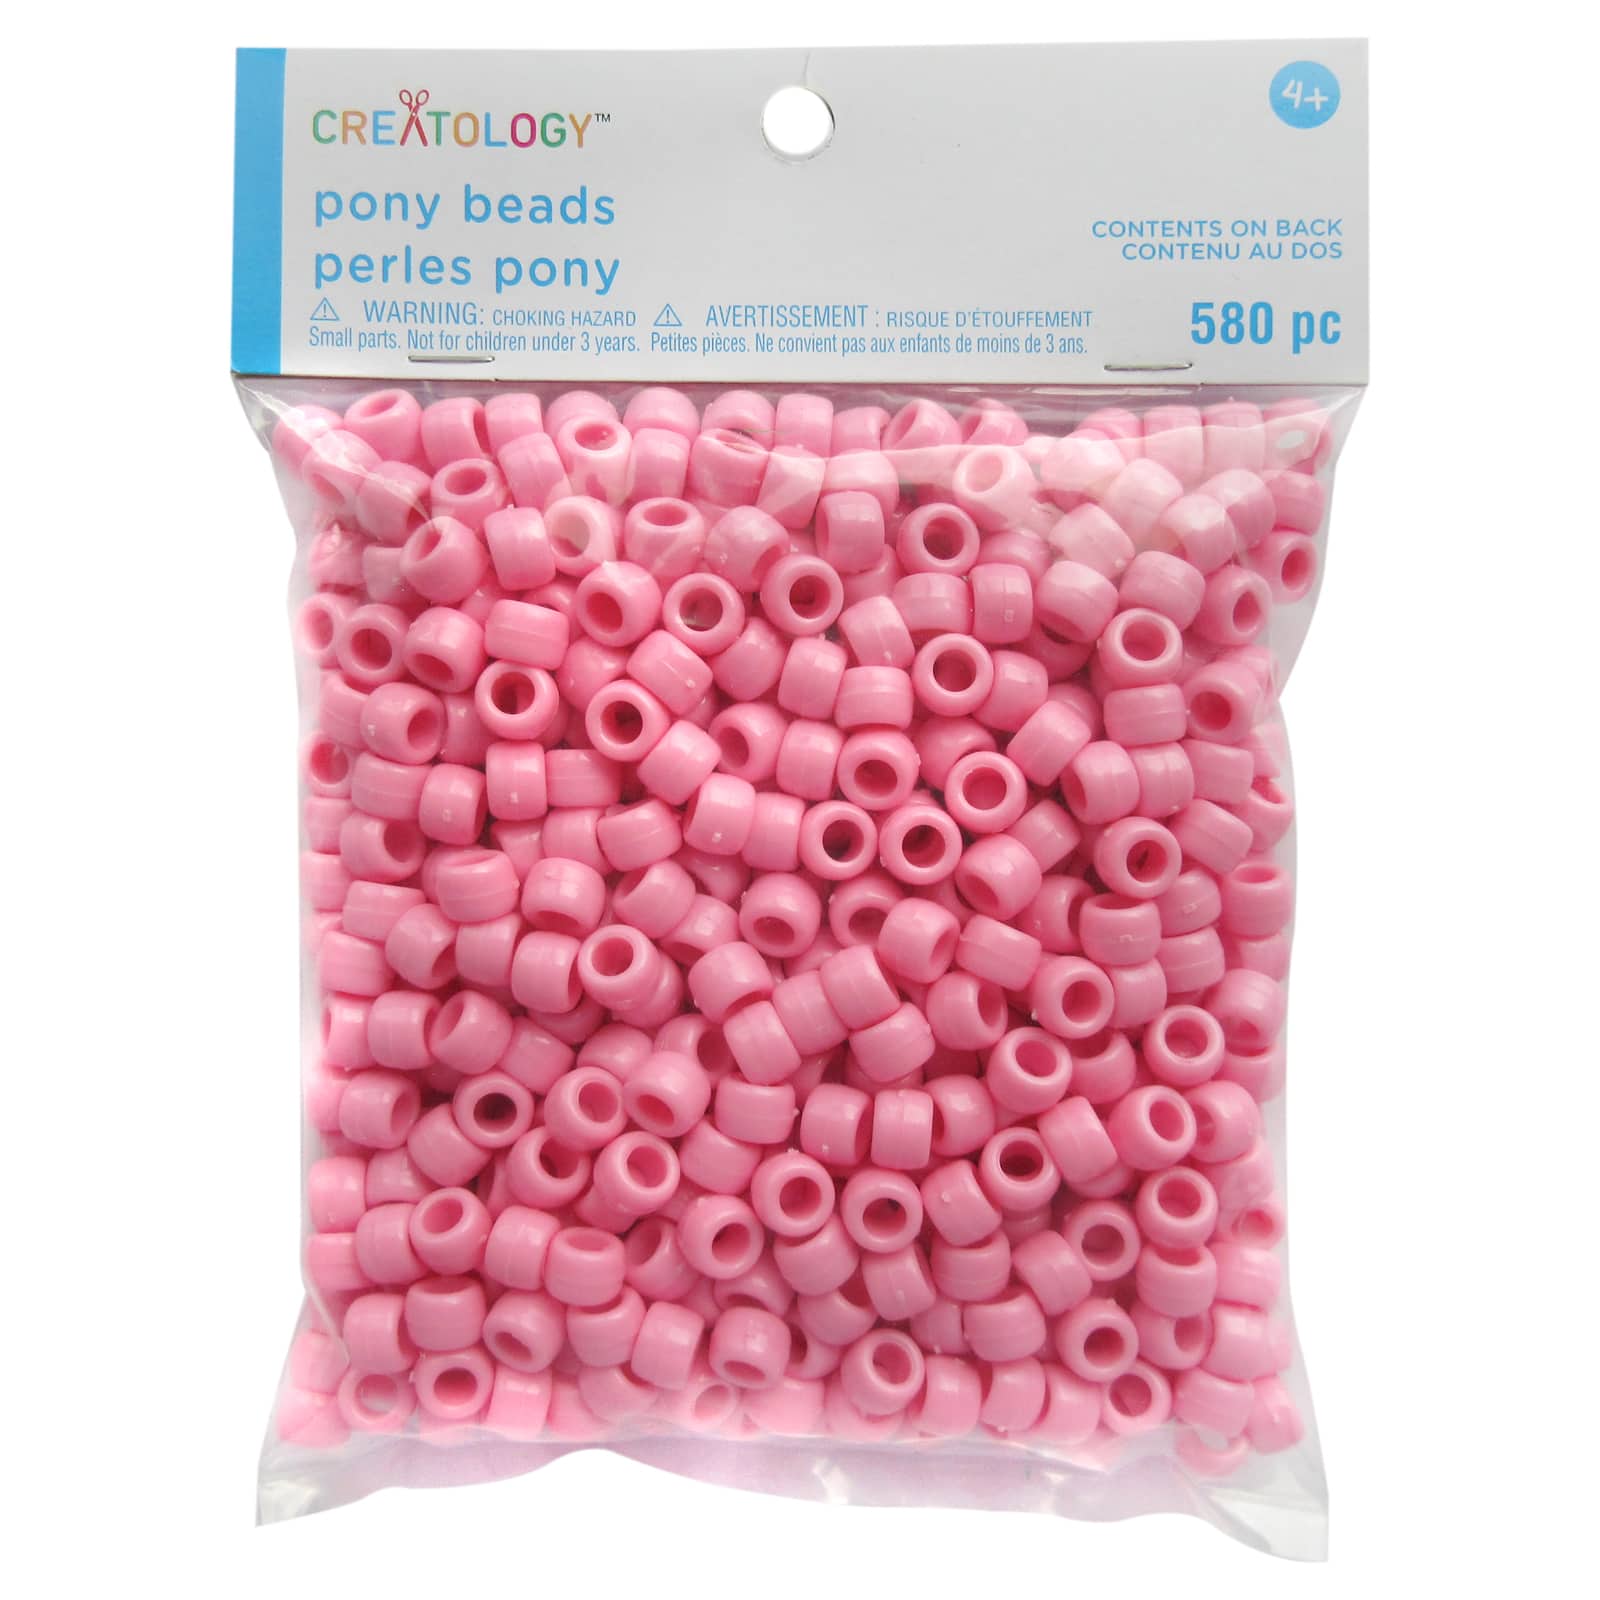 Opaque Pony Beads by Creatology™, 6mm x 9mm, Michaels